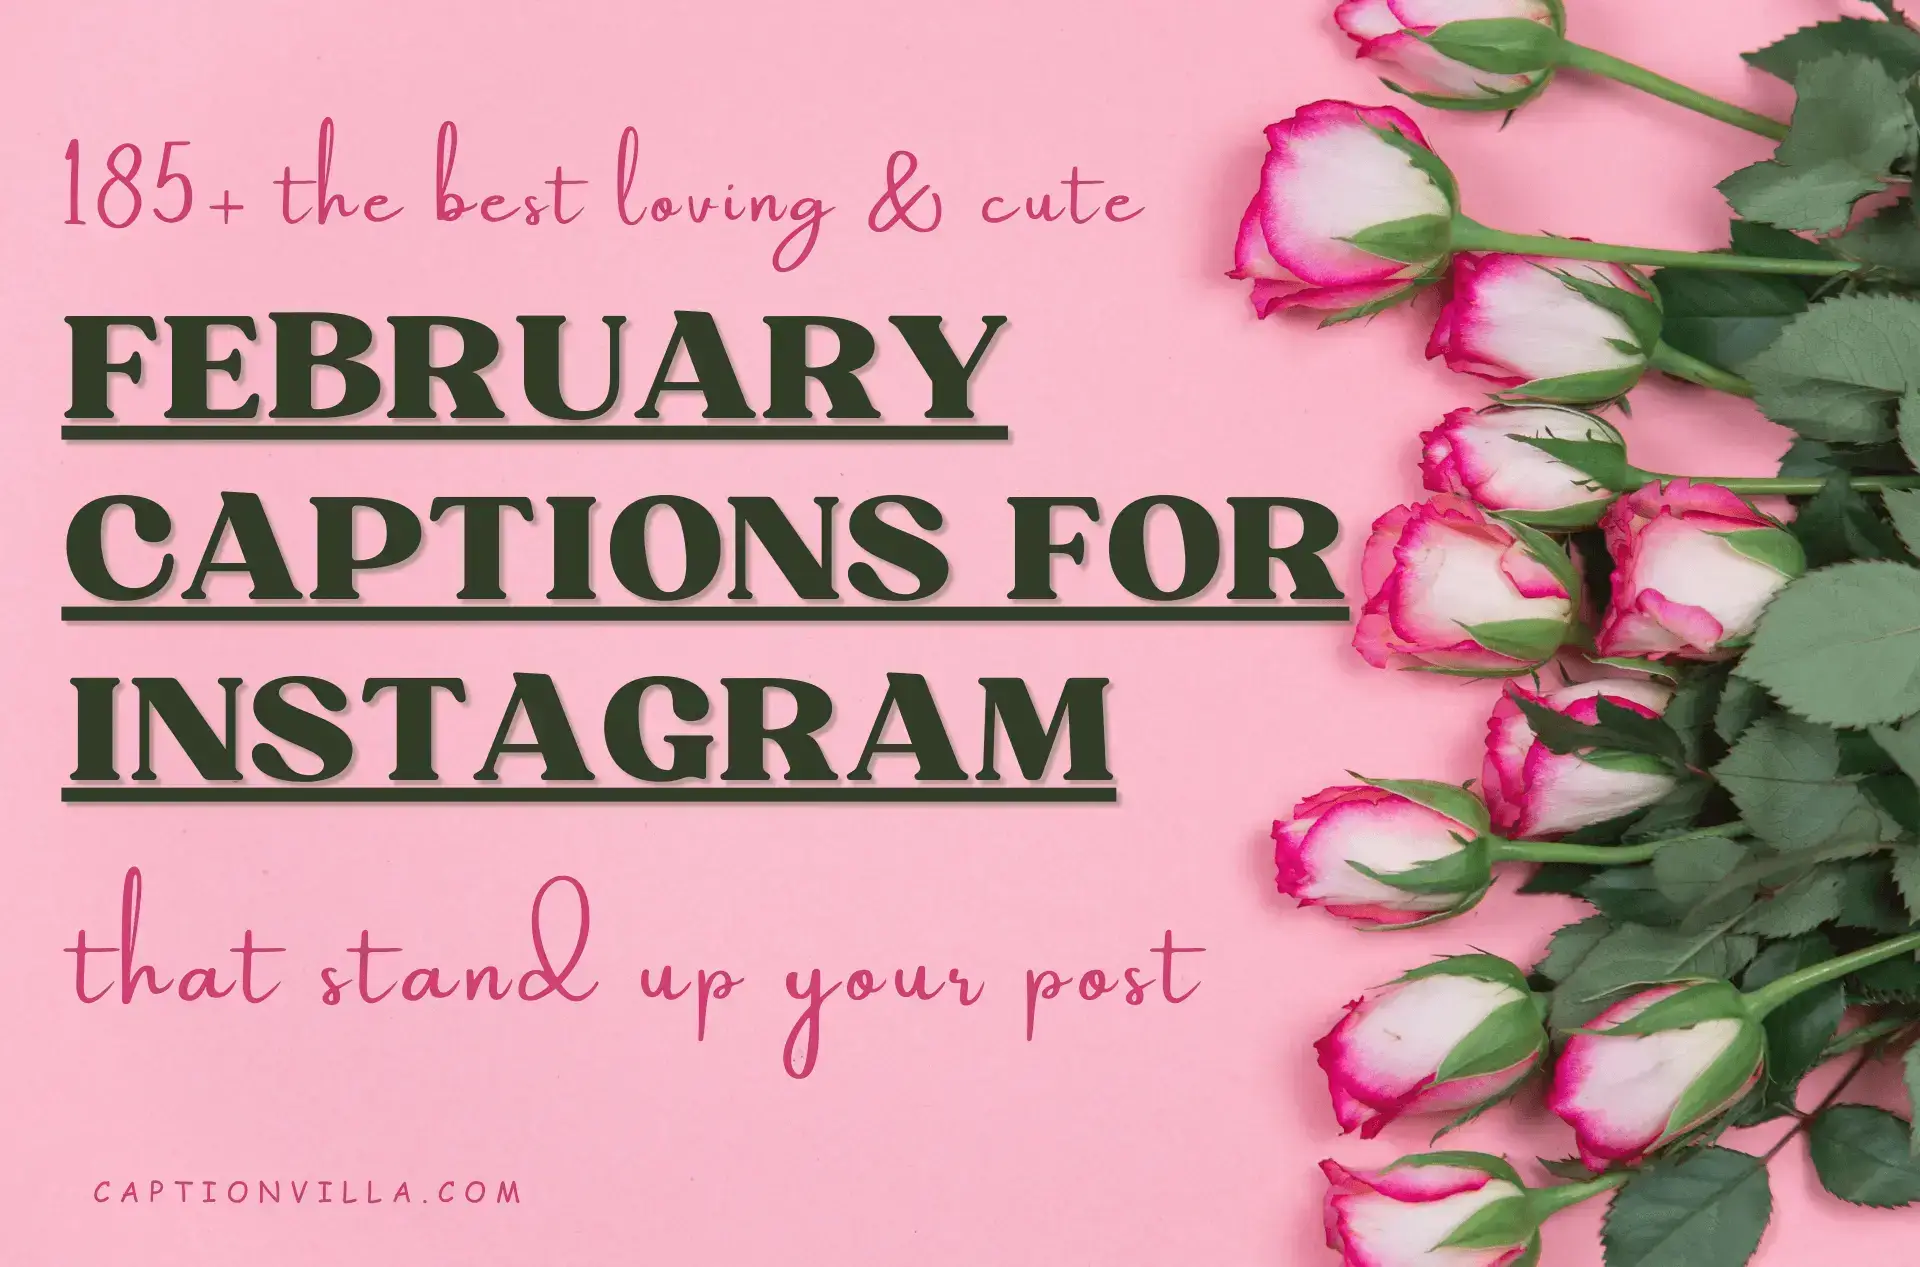 This image includes the title of February Captions for Instagram.